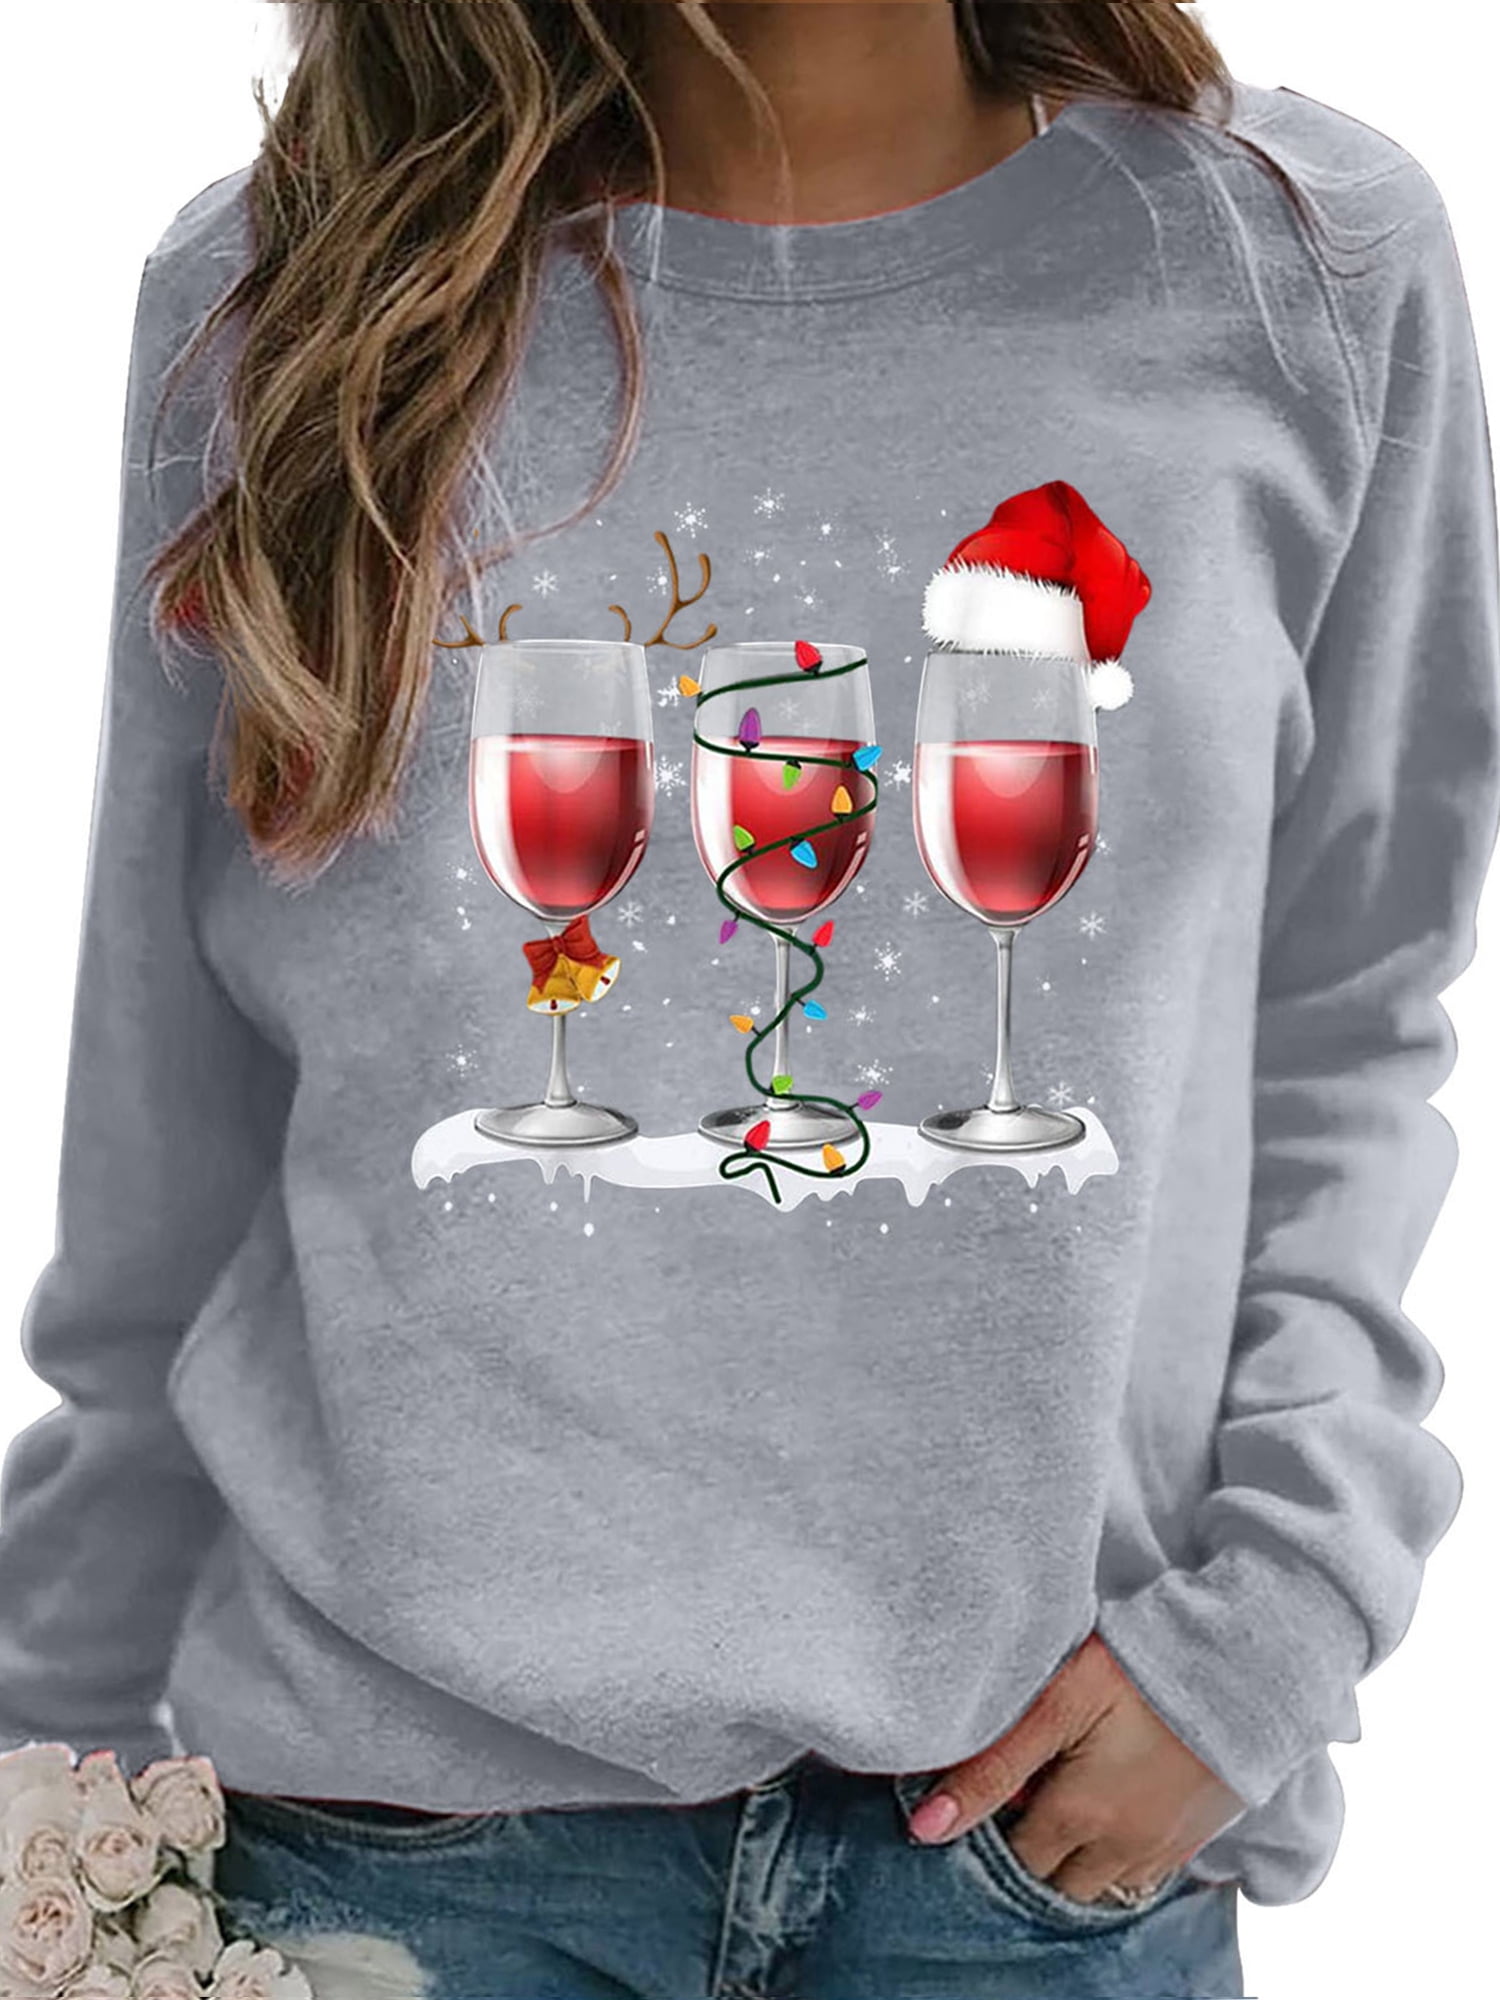 Sexy Dance Plus Size Women Christmas T-Shirts Tops Long Sleeve Round ...